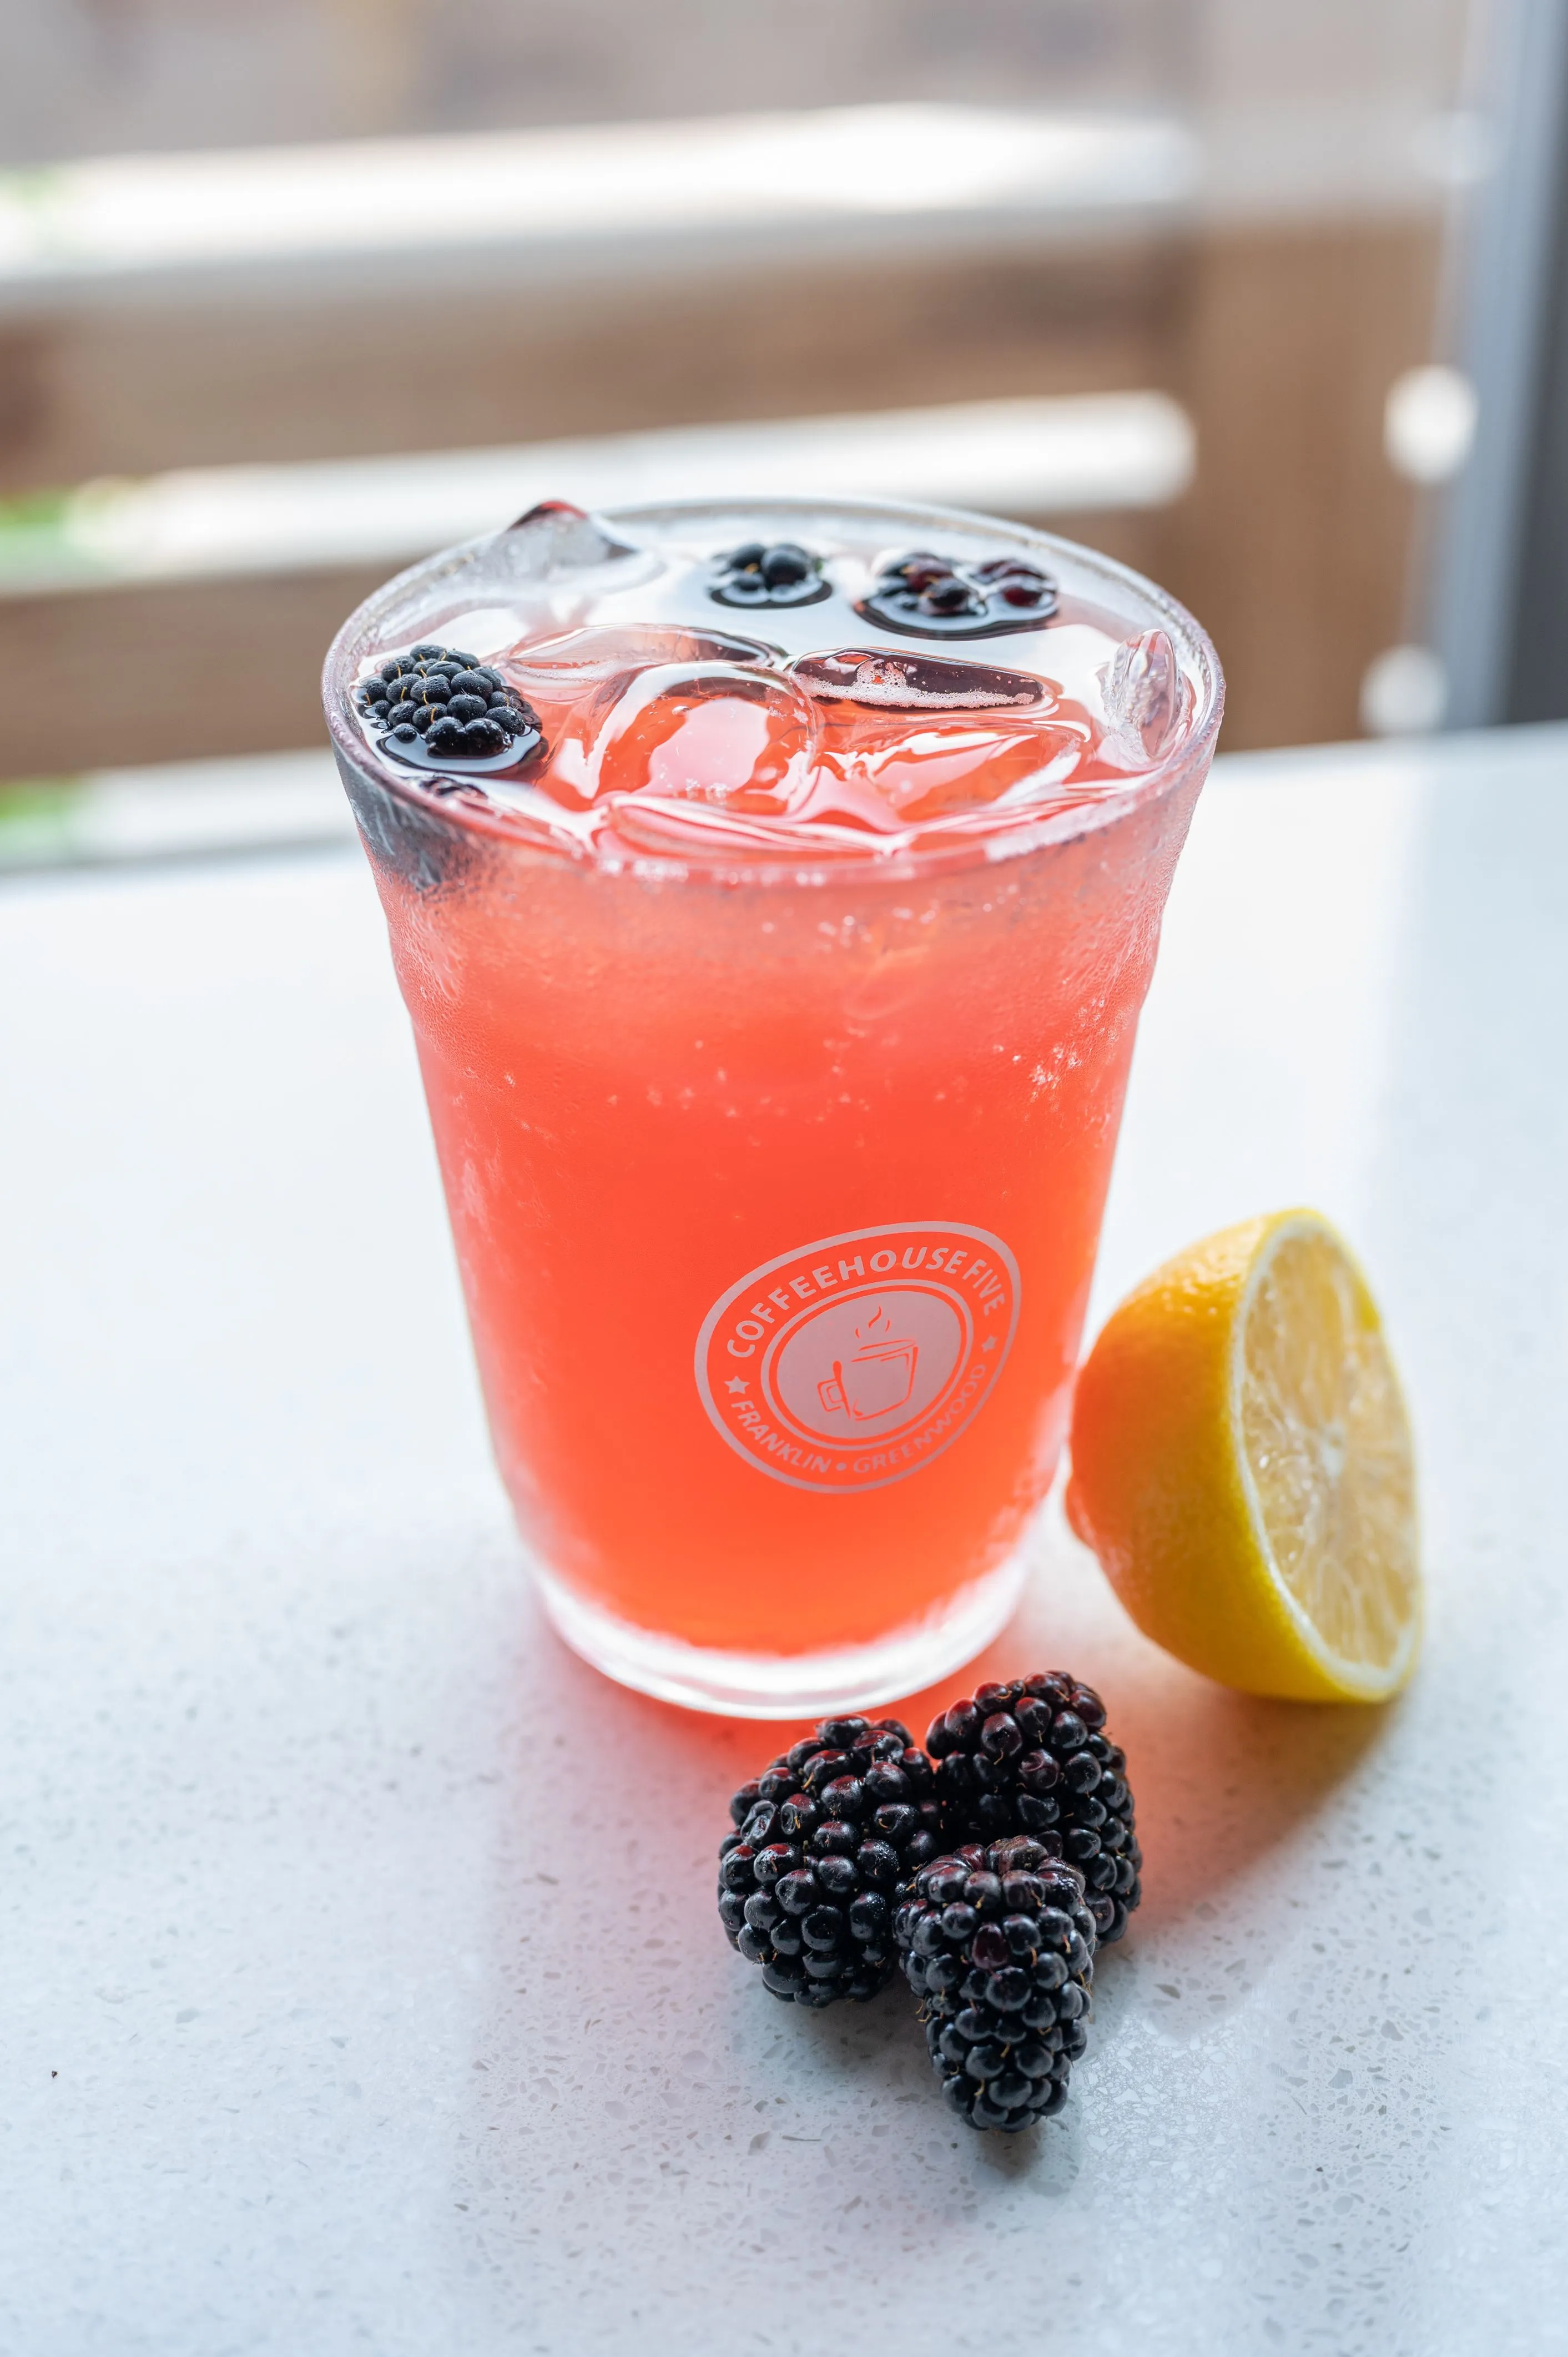 Iced pink beverage garnished with blackberries, served with a lemon slice and extra blackberries on the side, with visible logo on the glass.